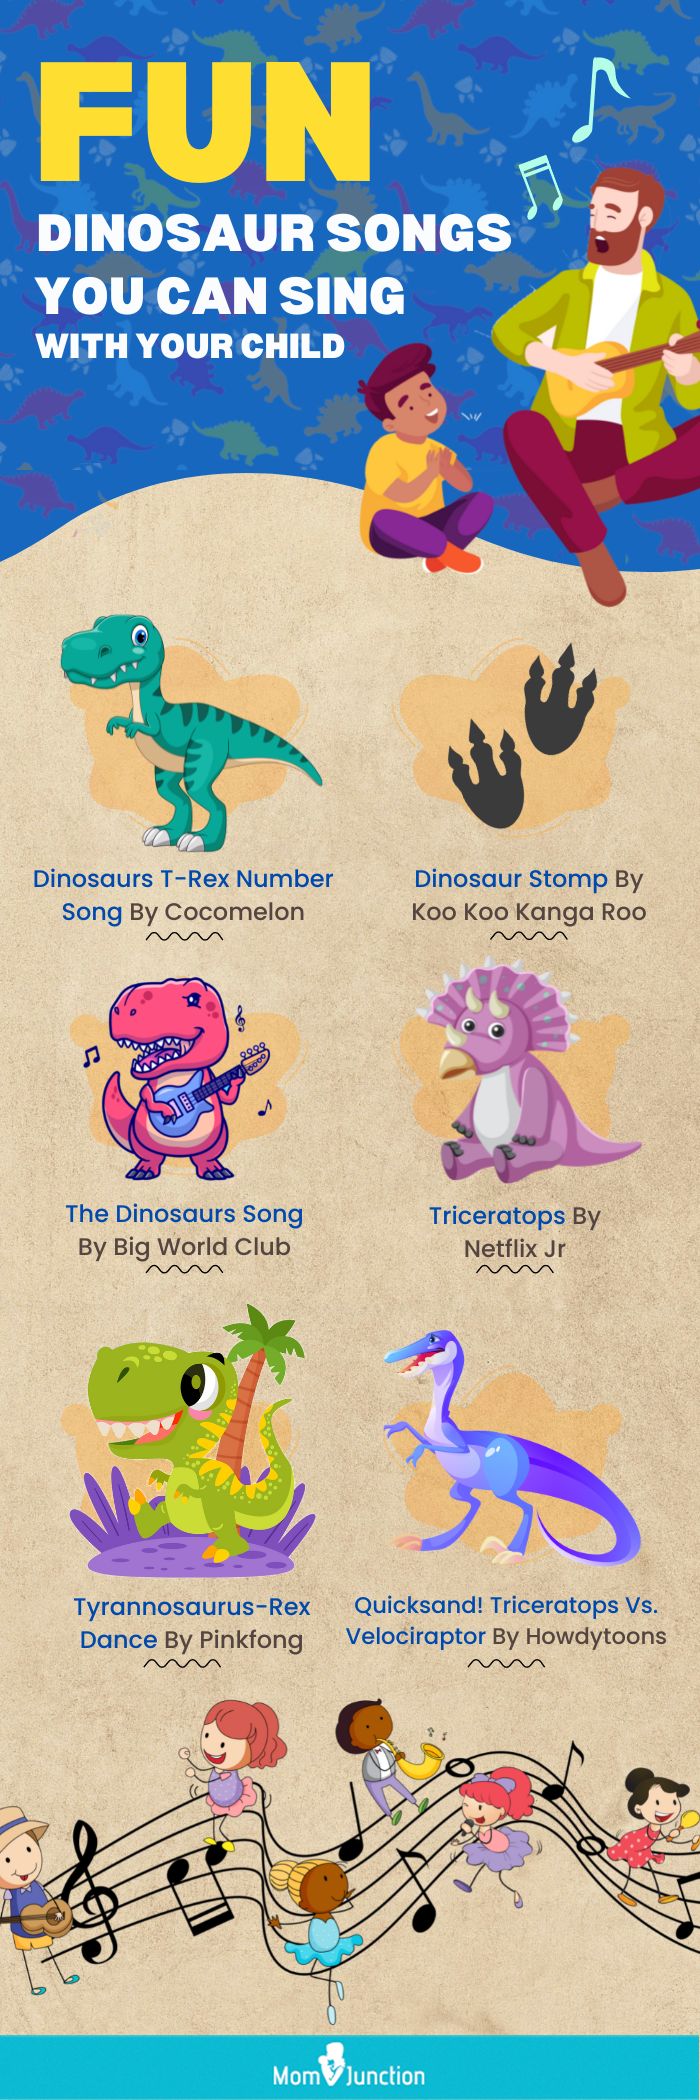 fun dinosaur songs you can sing with your child (infographic)